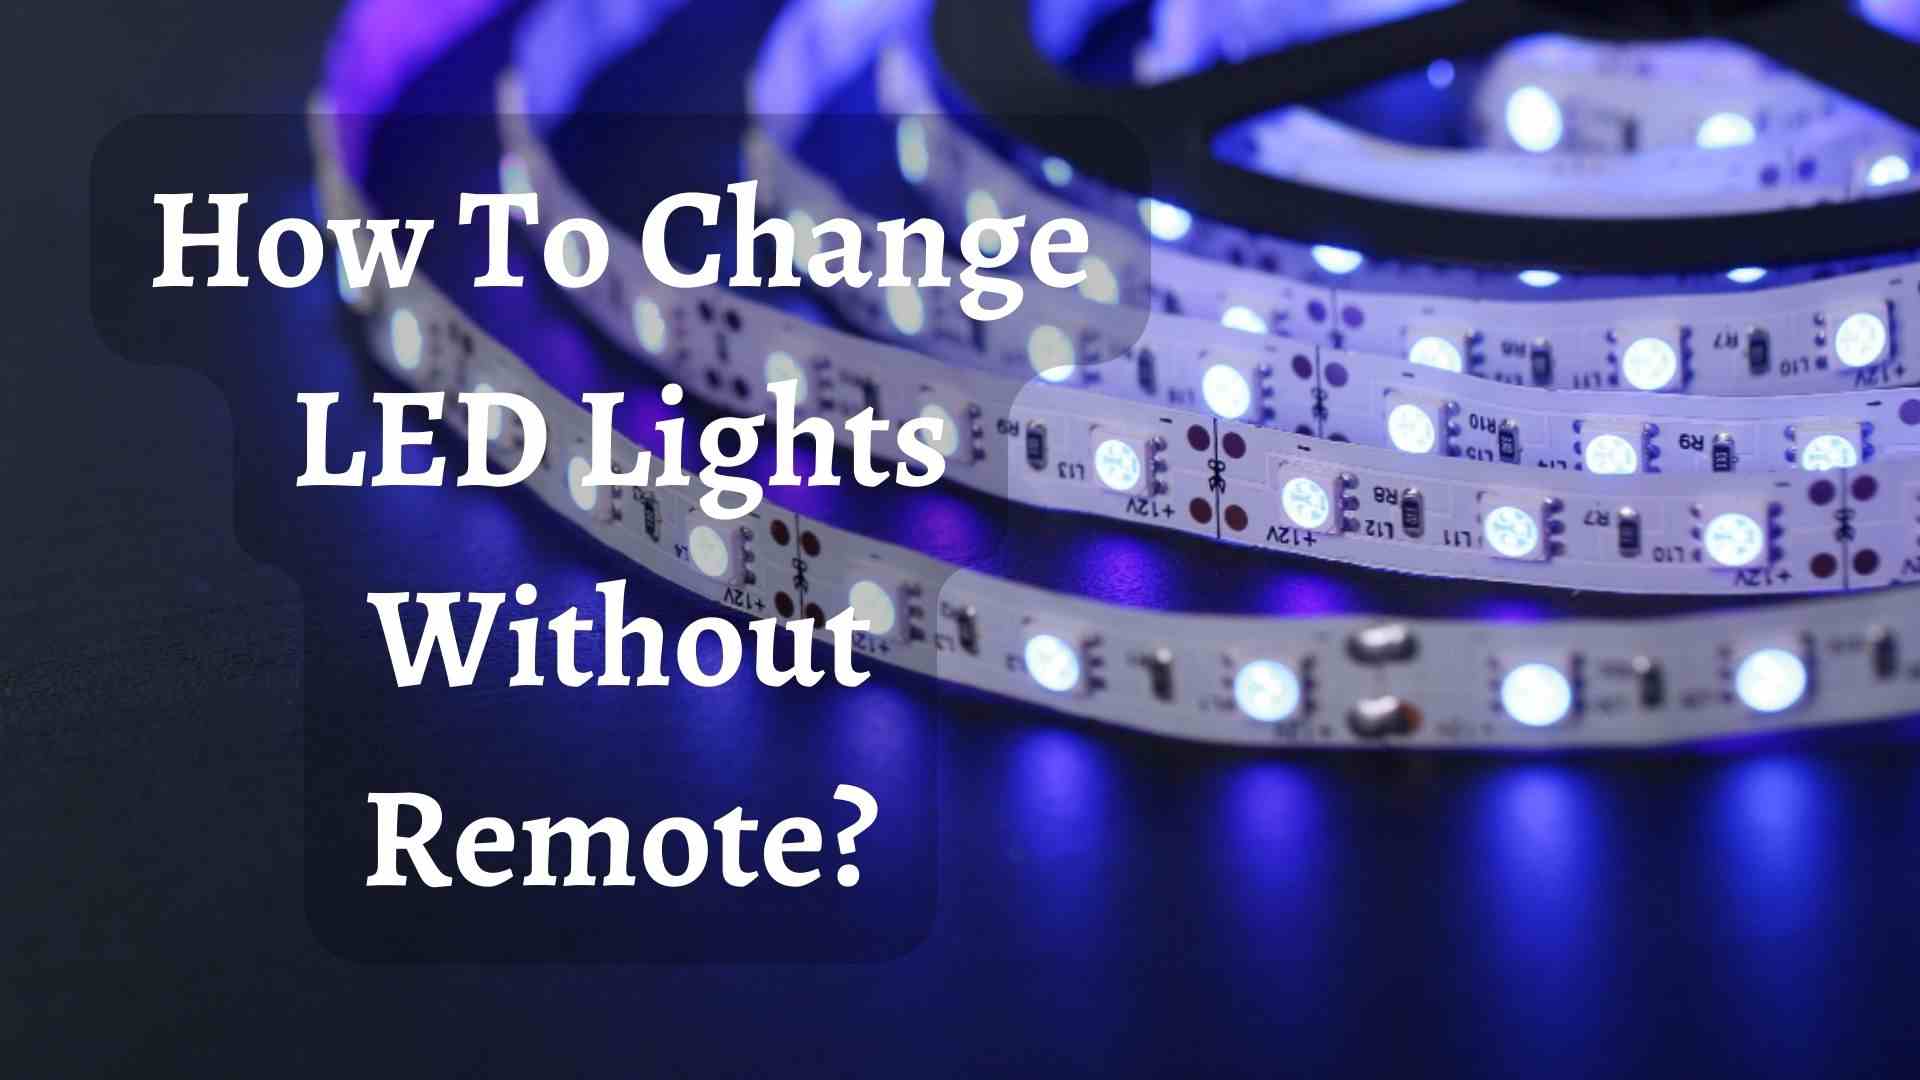 How To Change LED Lights Without Remote?